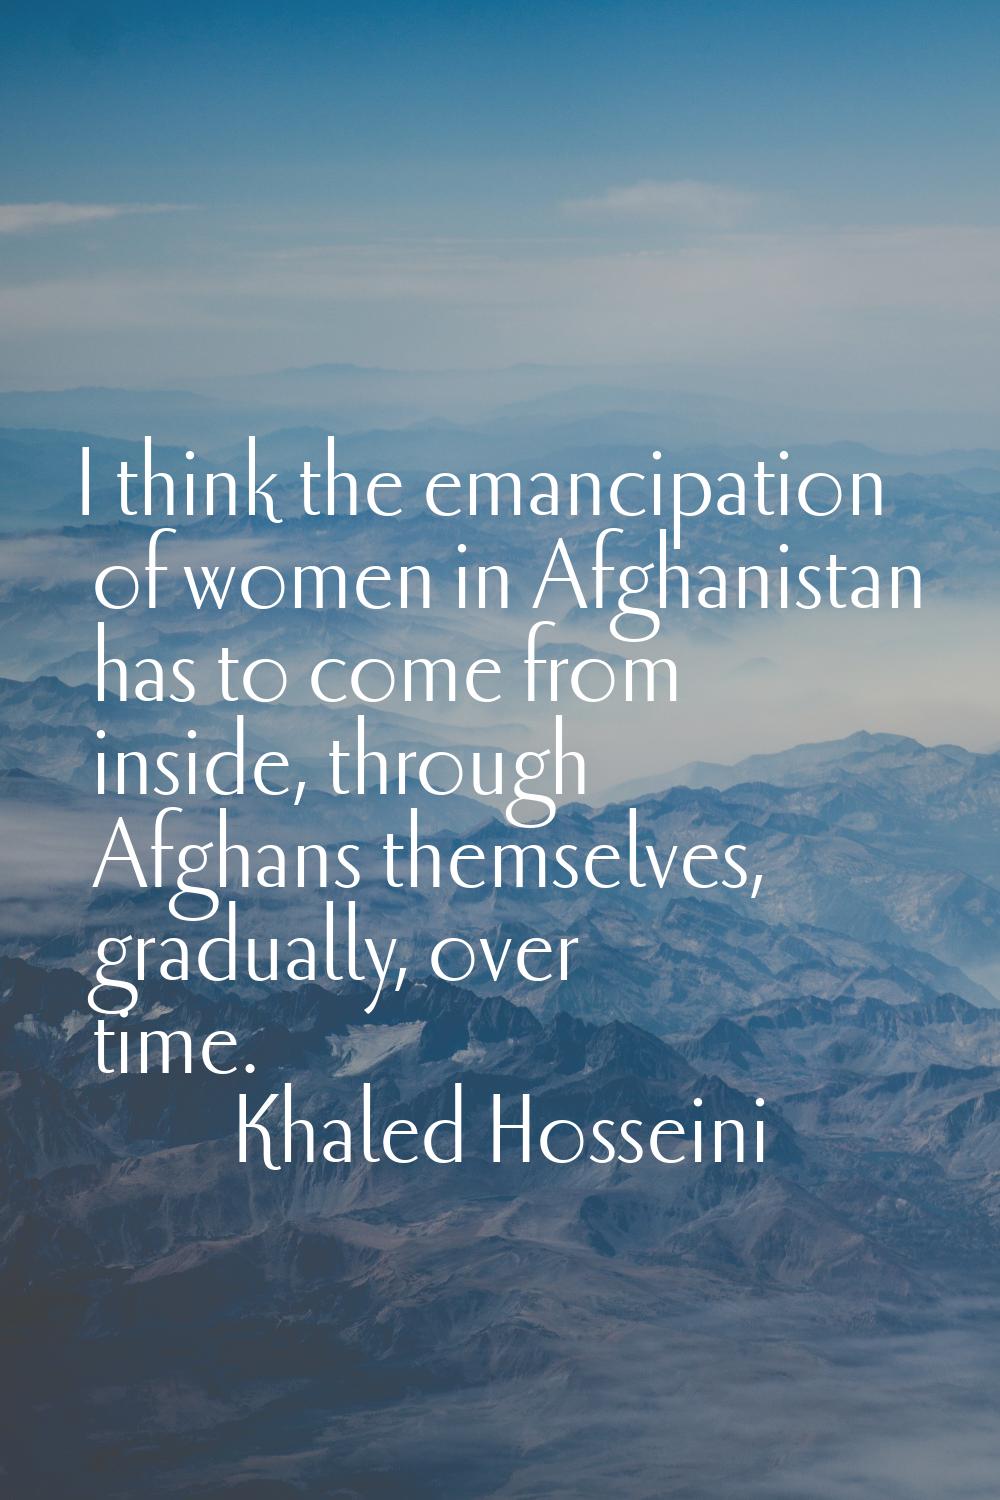 I think the emancipation of women in Afghanistan has to come from inside, through Afghans themselve